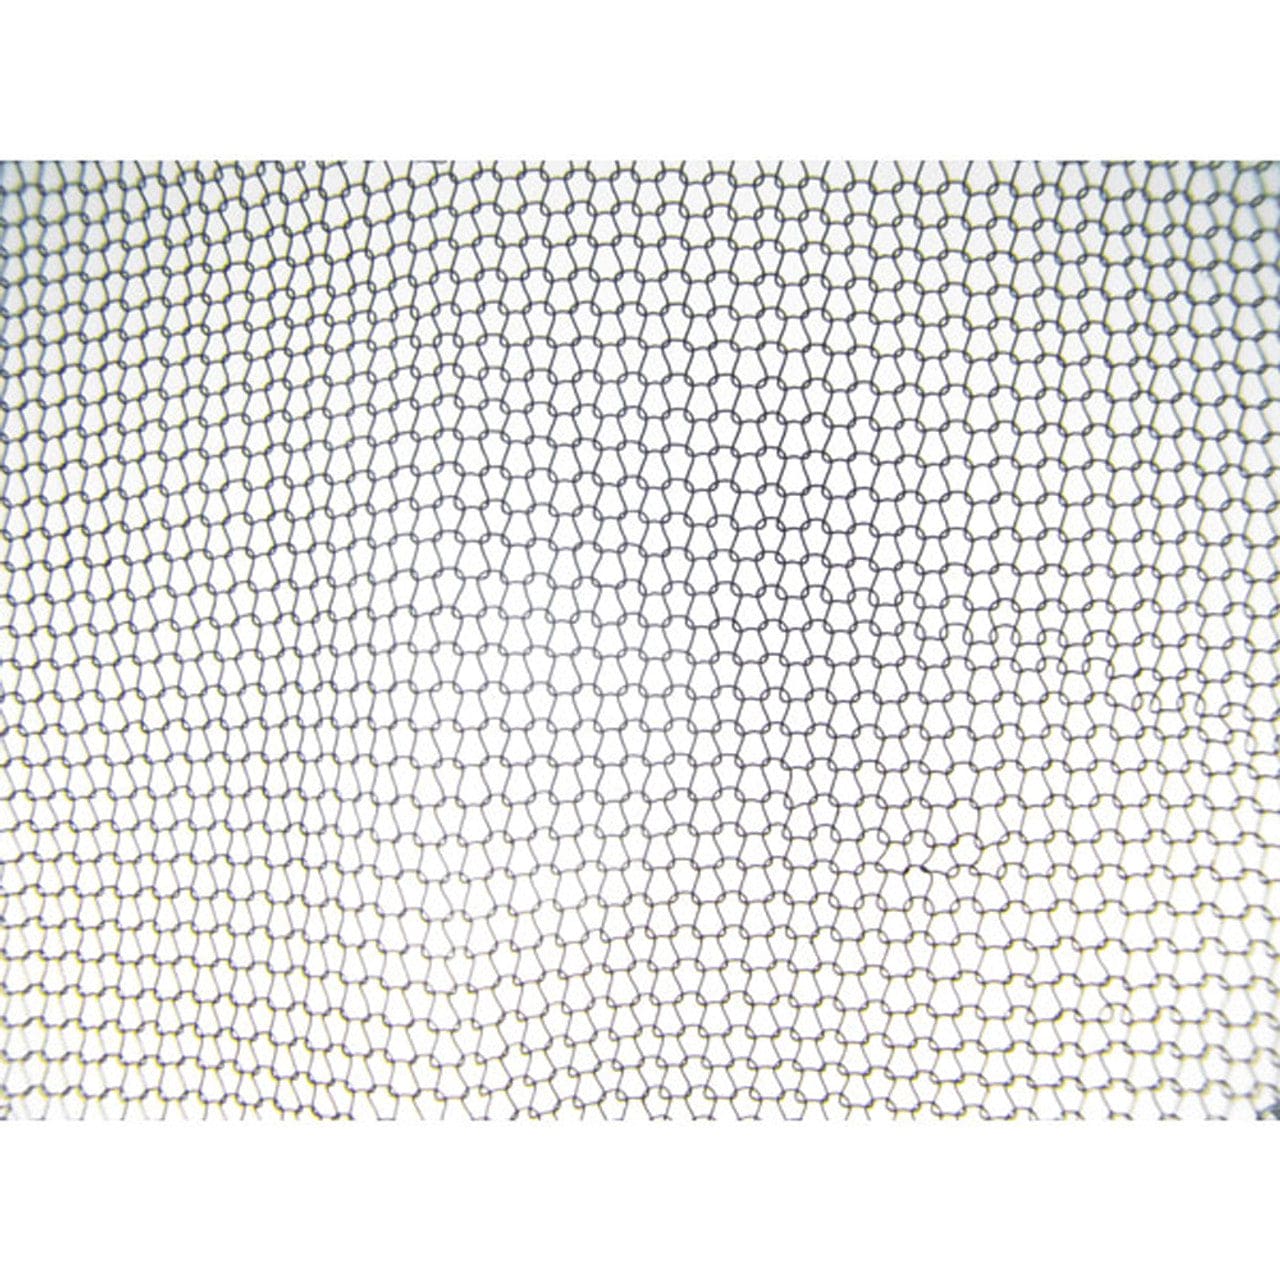 18" X 25' Roll HomeSaver 304 Stainless Steel Tight Weave ArmorMesh - 54-0610-1075 - Chimney Cricket